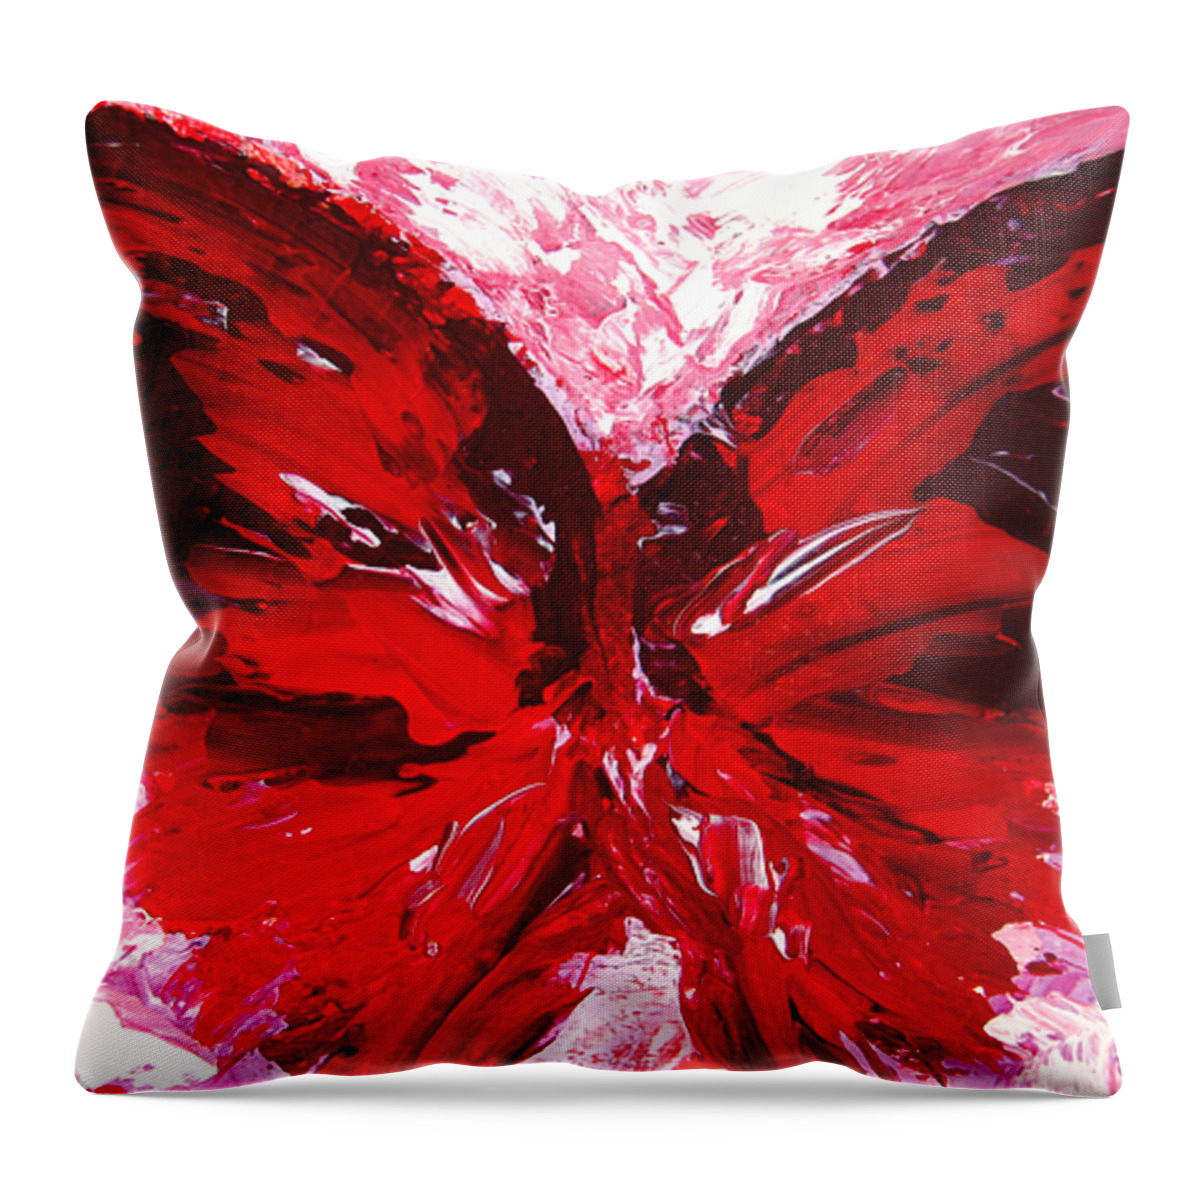 Red Throw Pillow featuring the painting Red Butterfly by Patricia Awapara